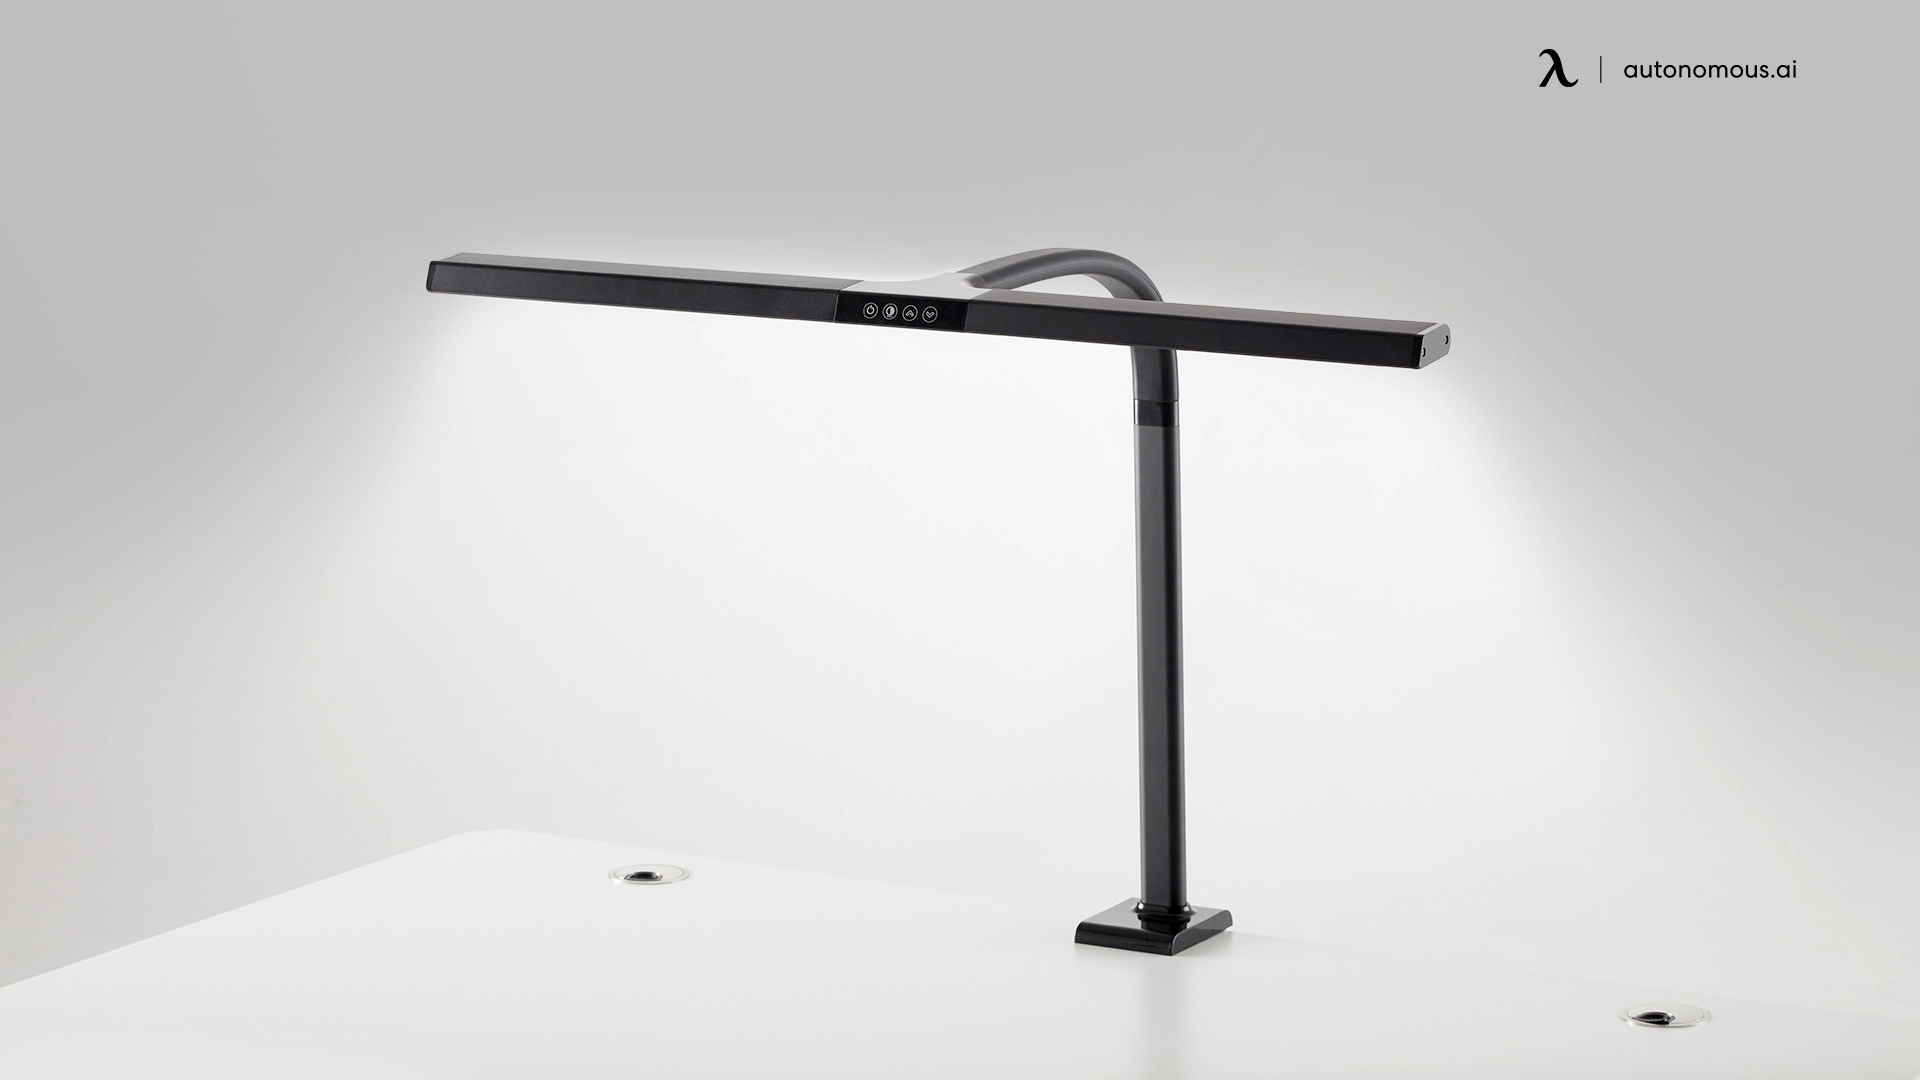 LED Desk Lamp as work from home accessories